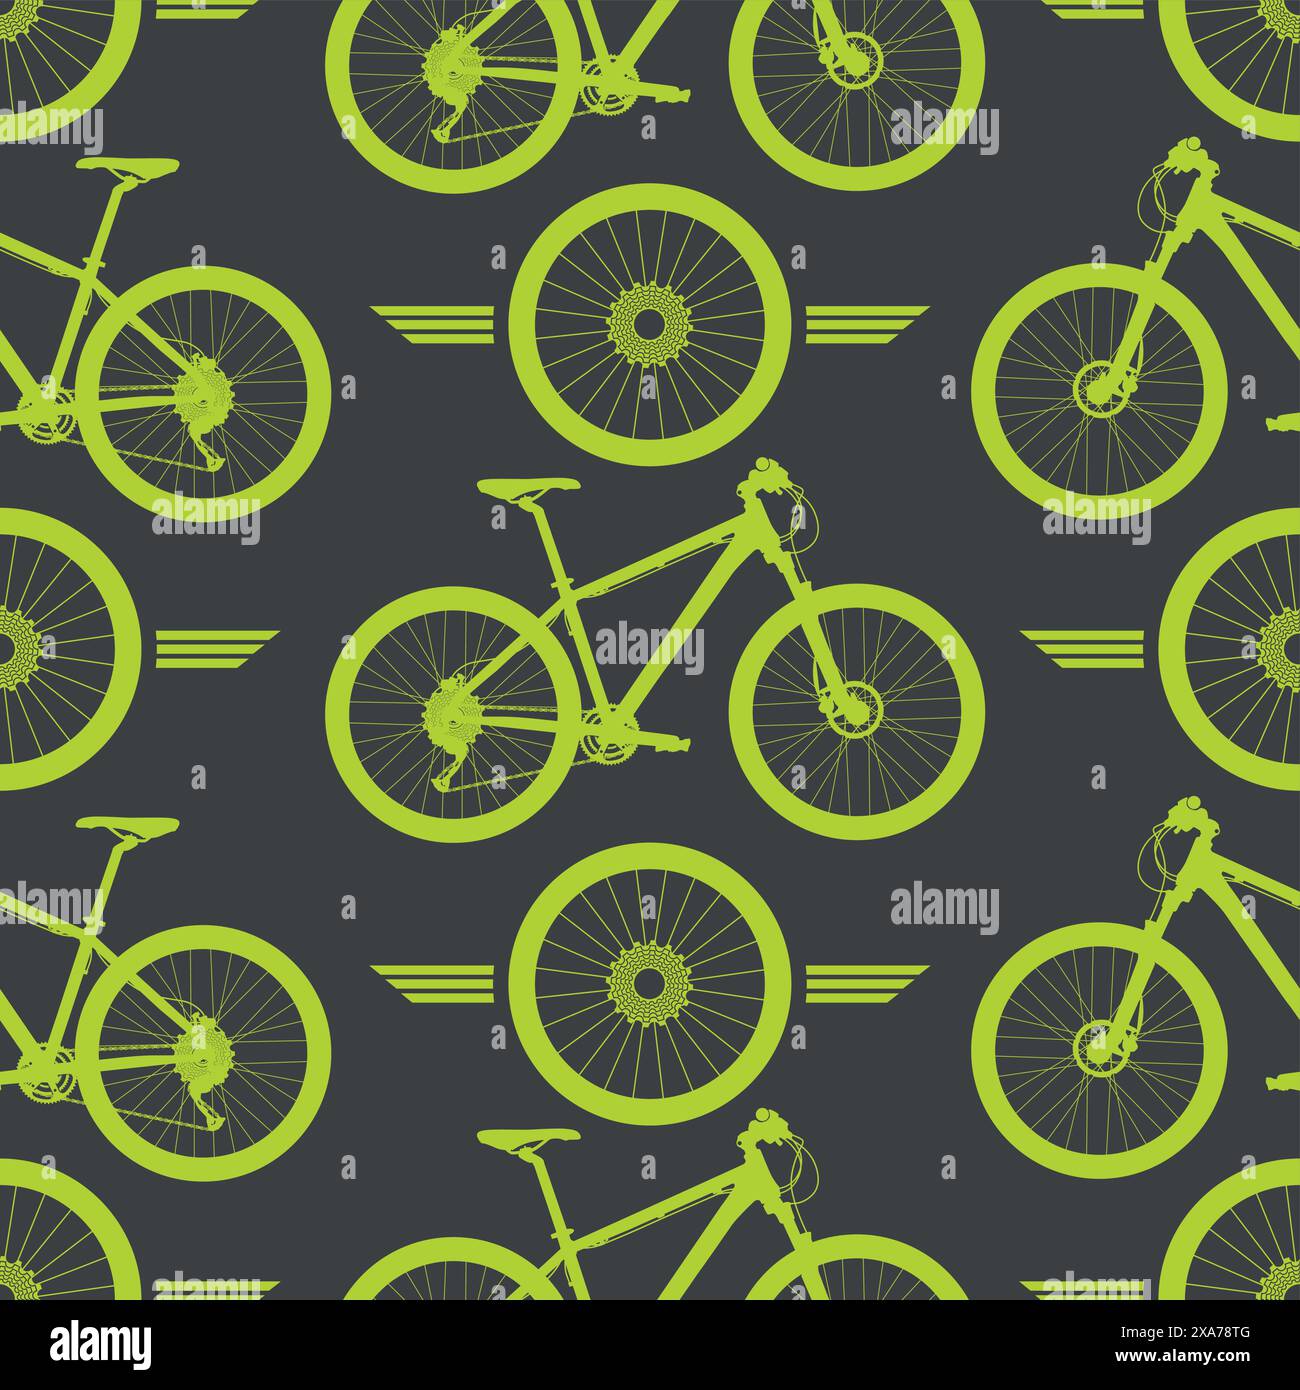 Green bicycle wheel and mountain bike seamles pattern over grey background Stock Vector